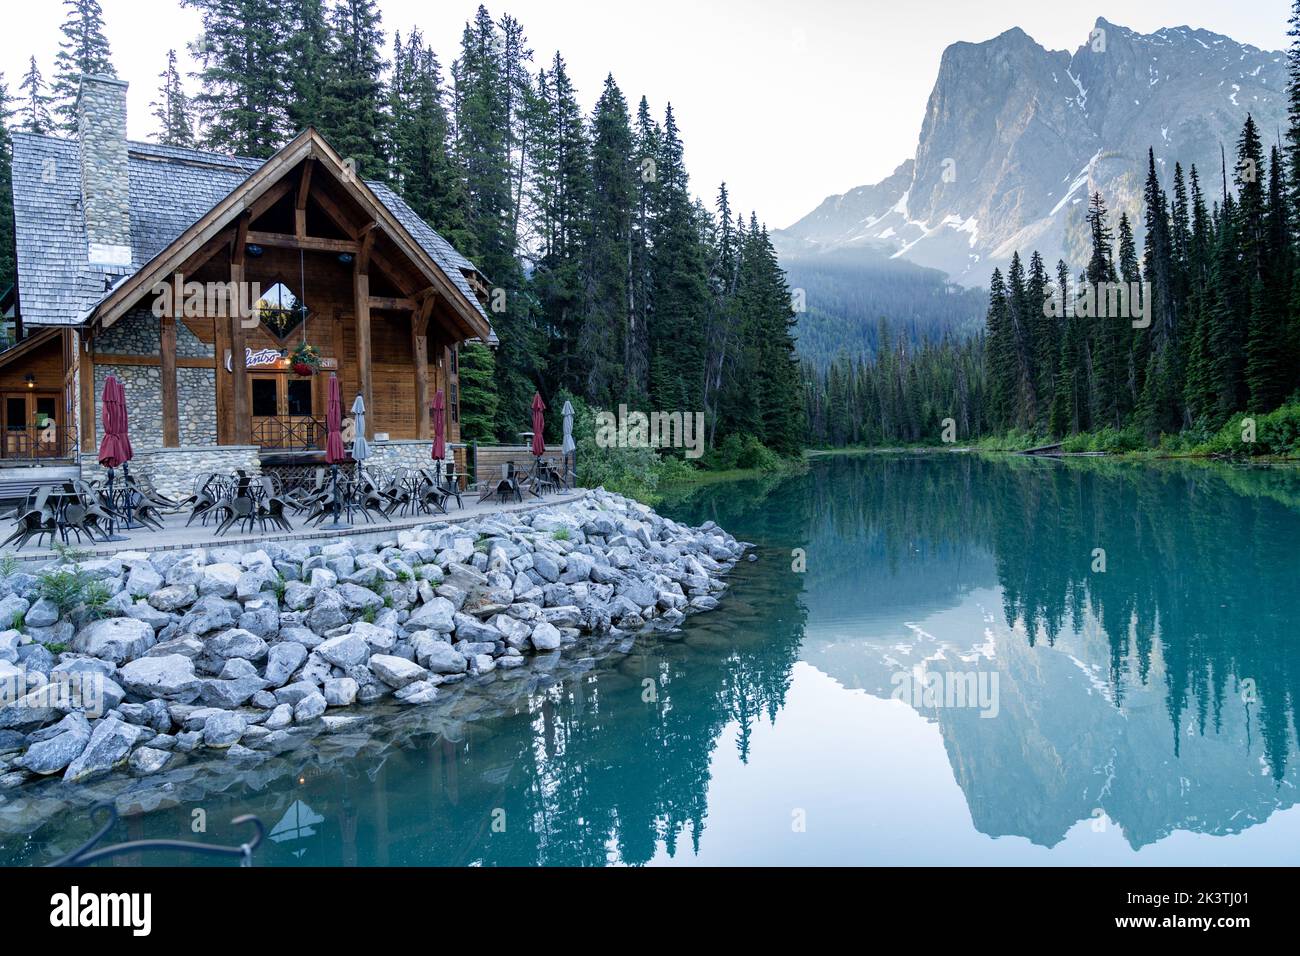 British Columbia, Canada - July 12, 2022: Cafe and restaurant at the Emerald Lake Lodge resort in Yoho National Park Stock Photo